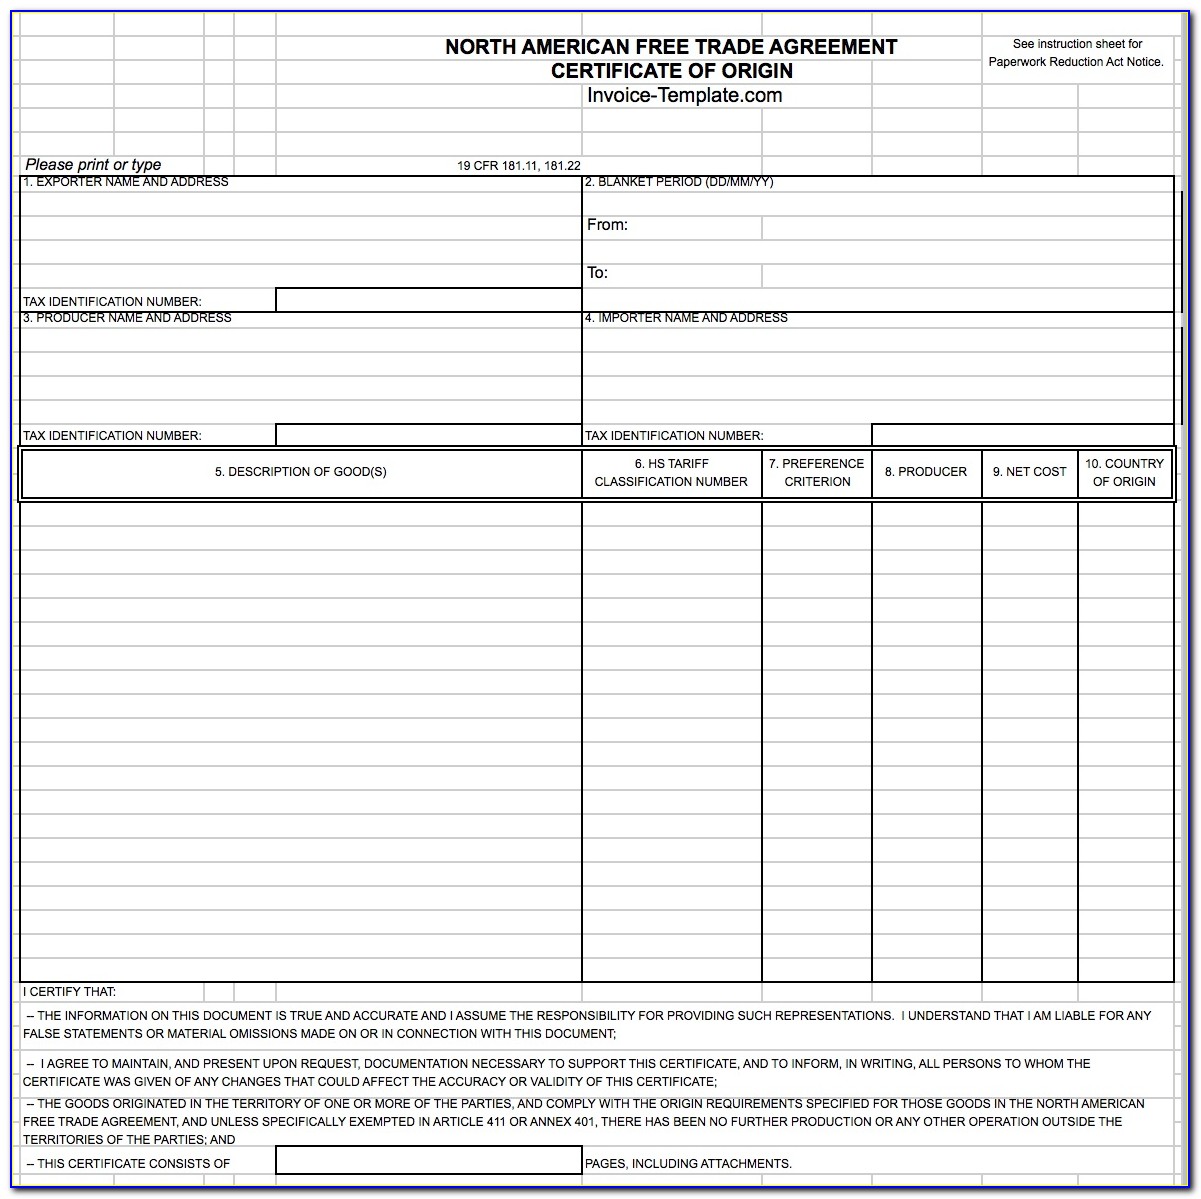 Nafta Commercial Invoice Template